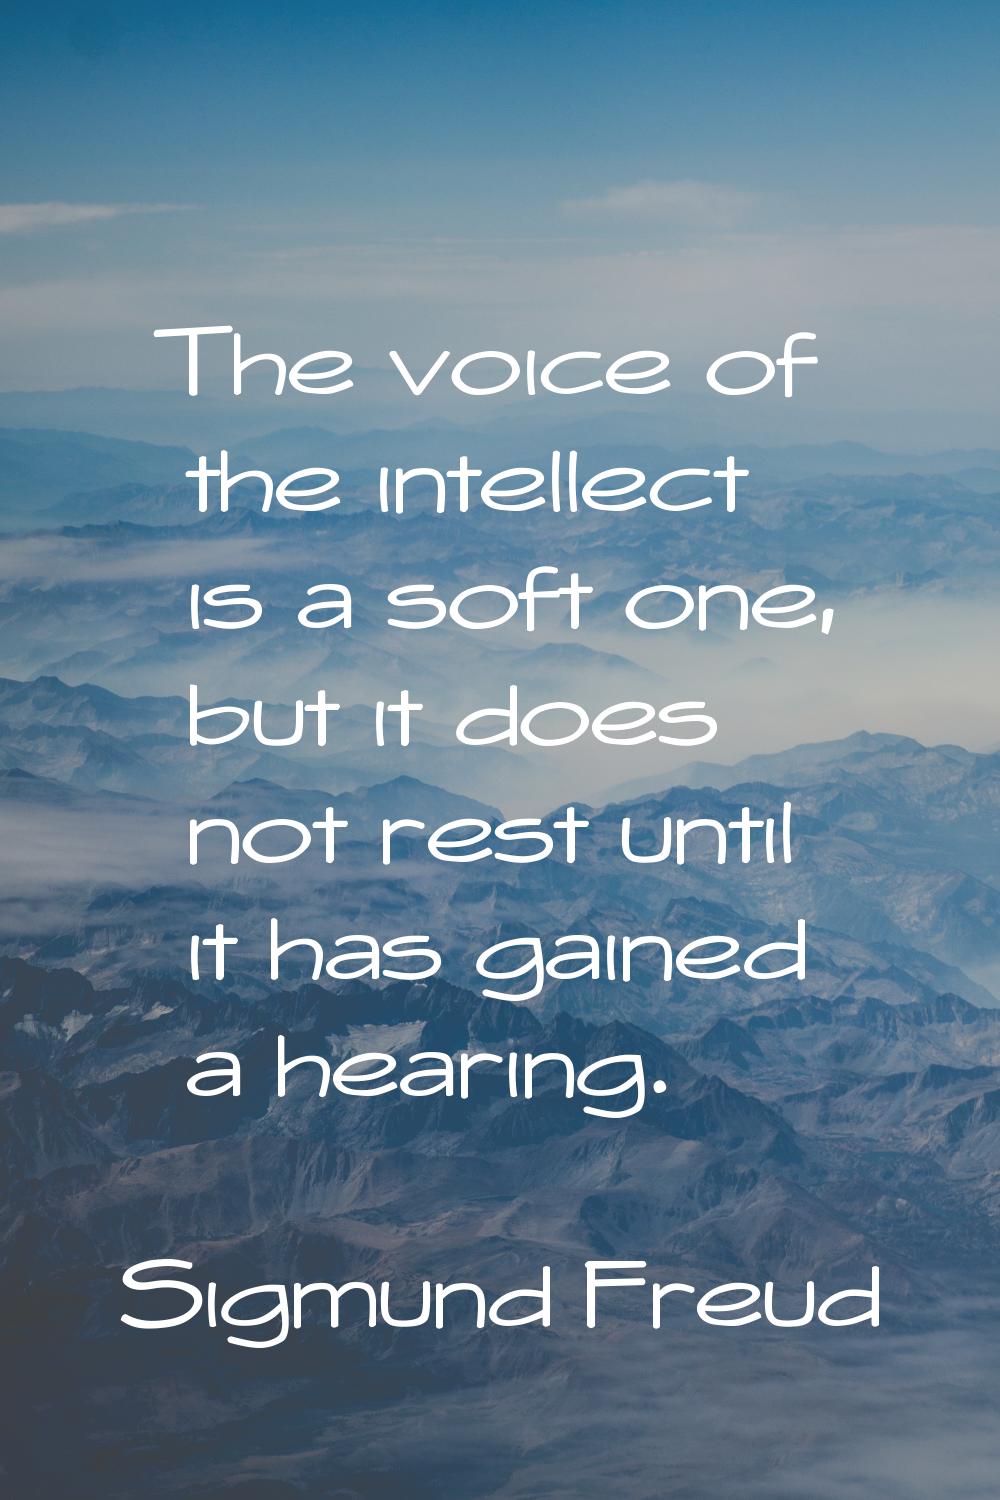 The voice of the intellect is a soft one, but it does not rest until it has gained a hearing.